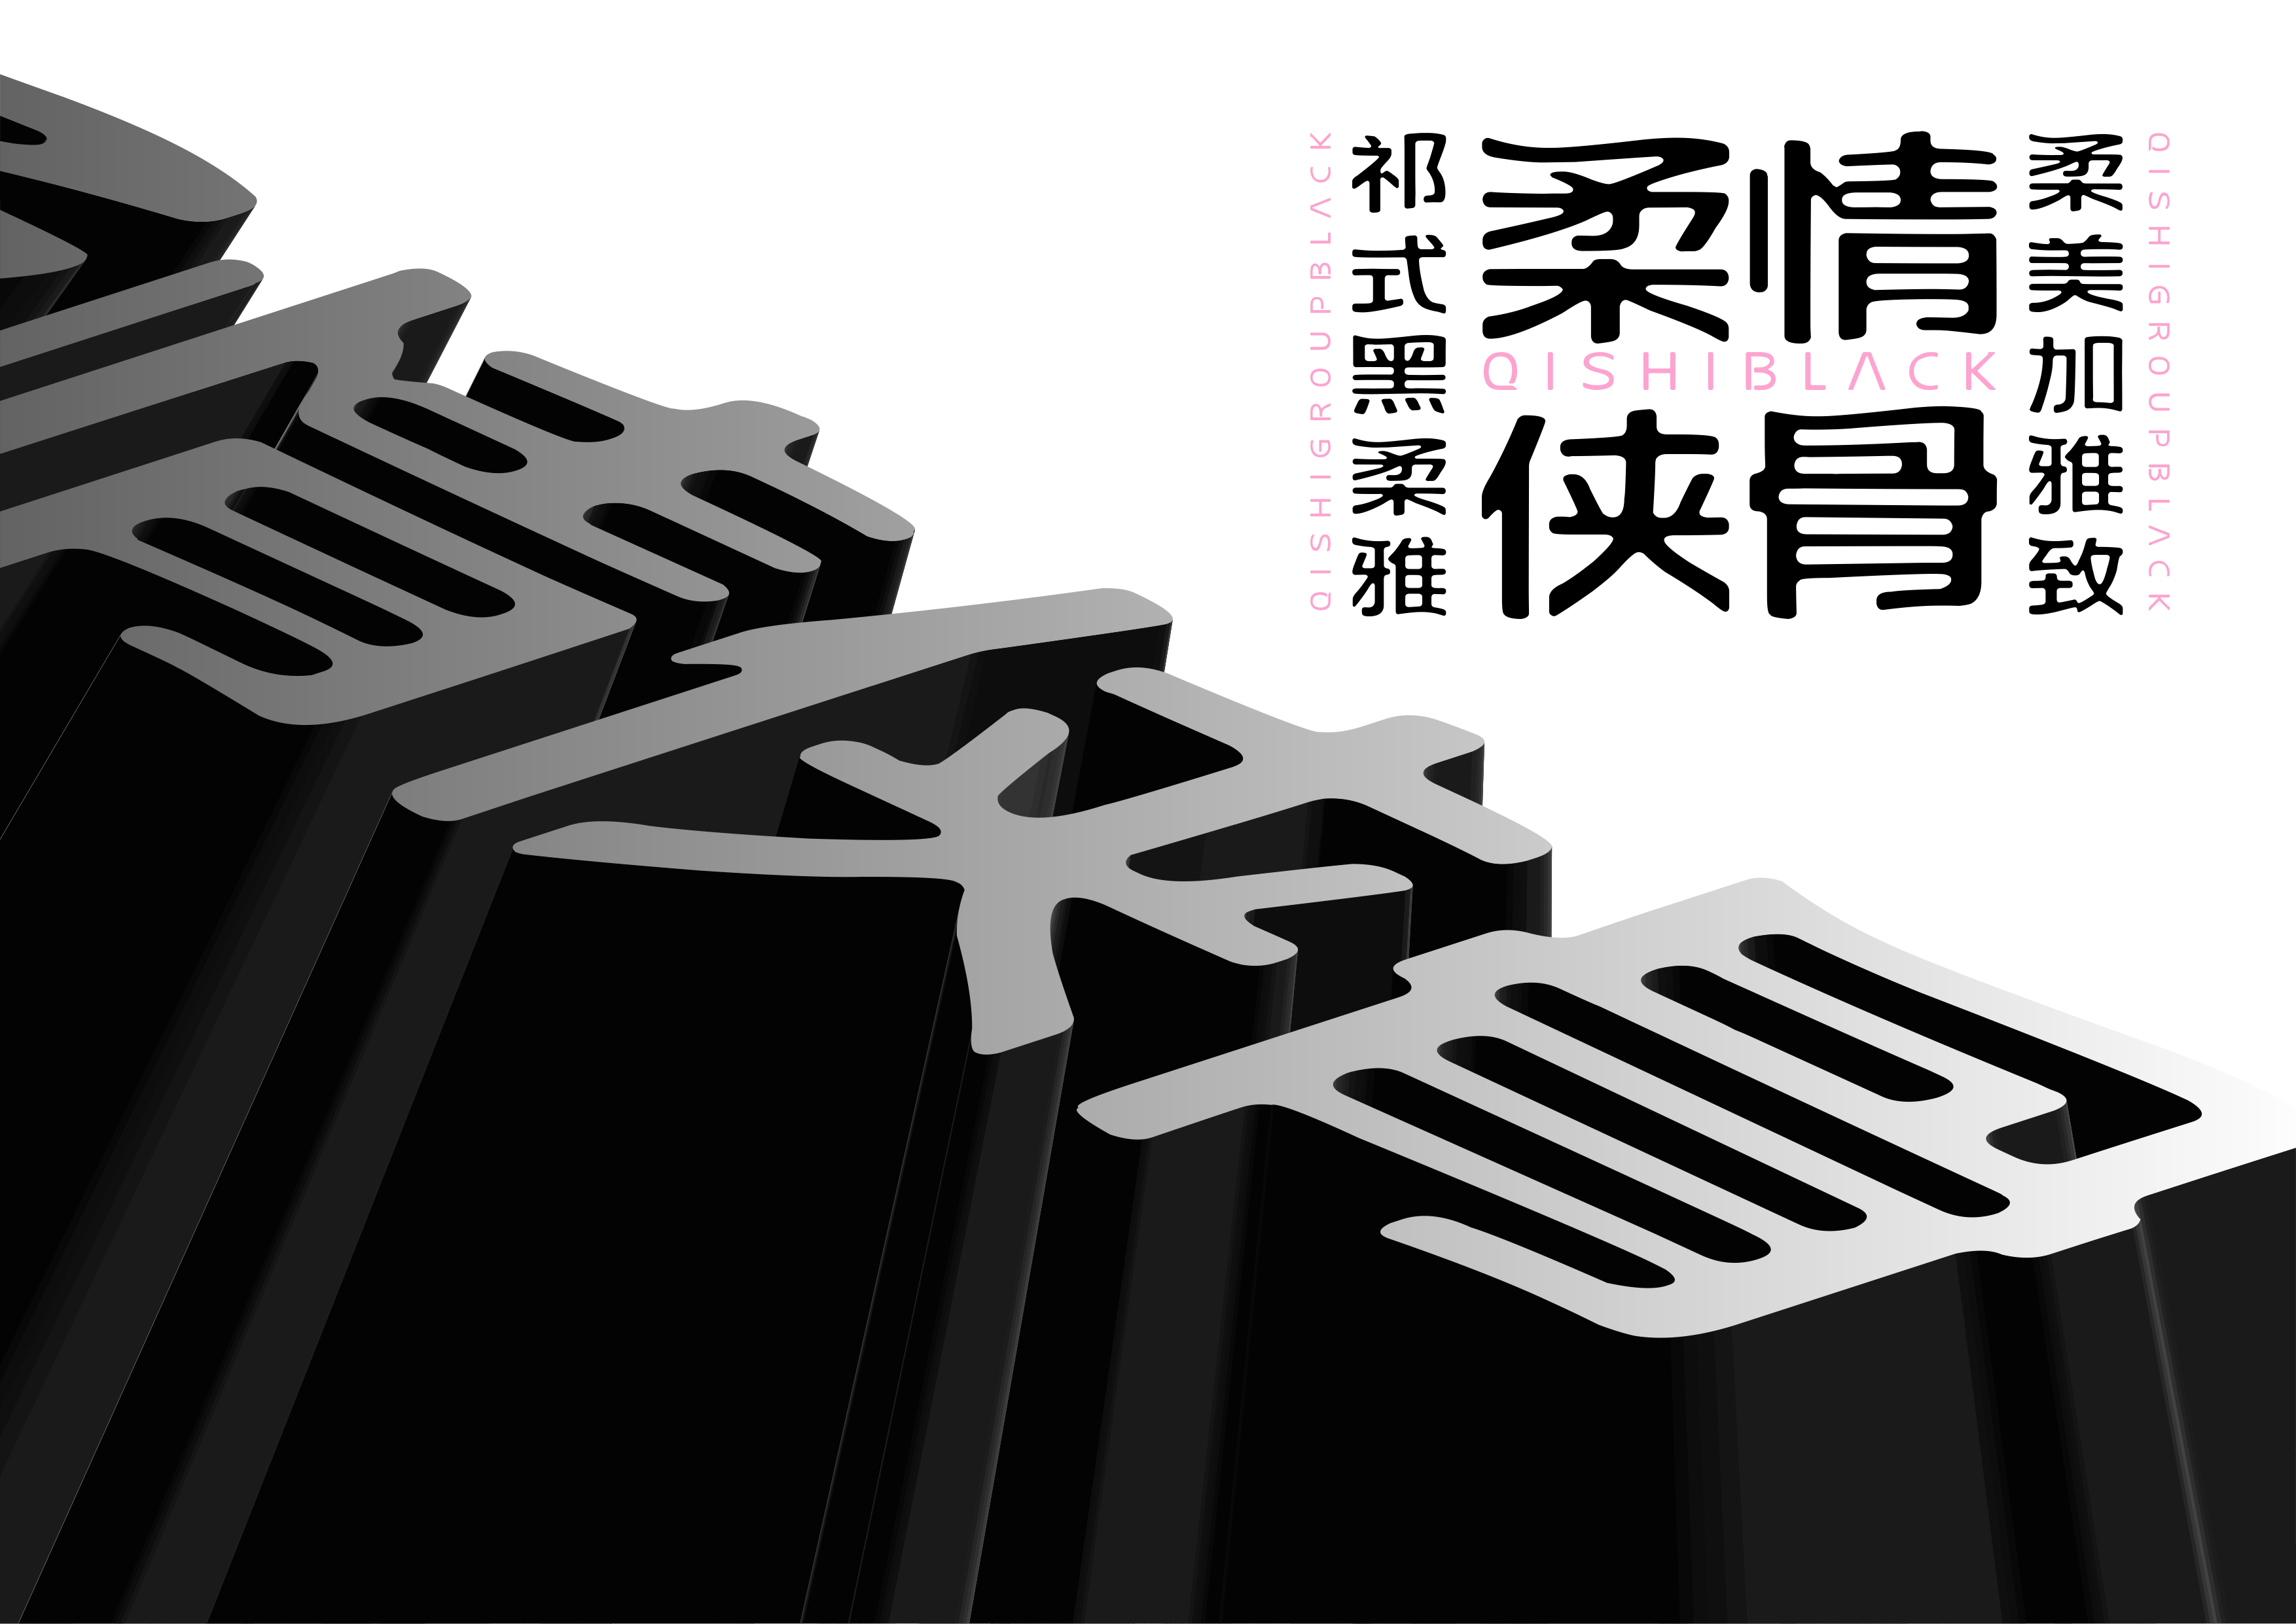 39P Collection of the latest Chinese font design schemes in 2021 #.174